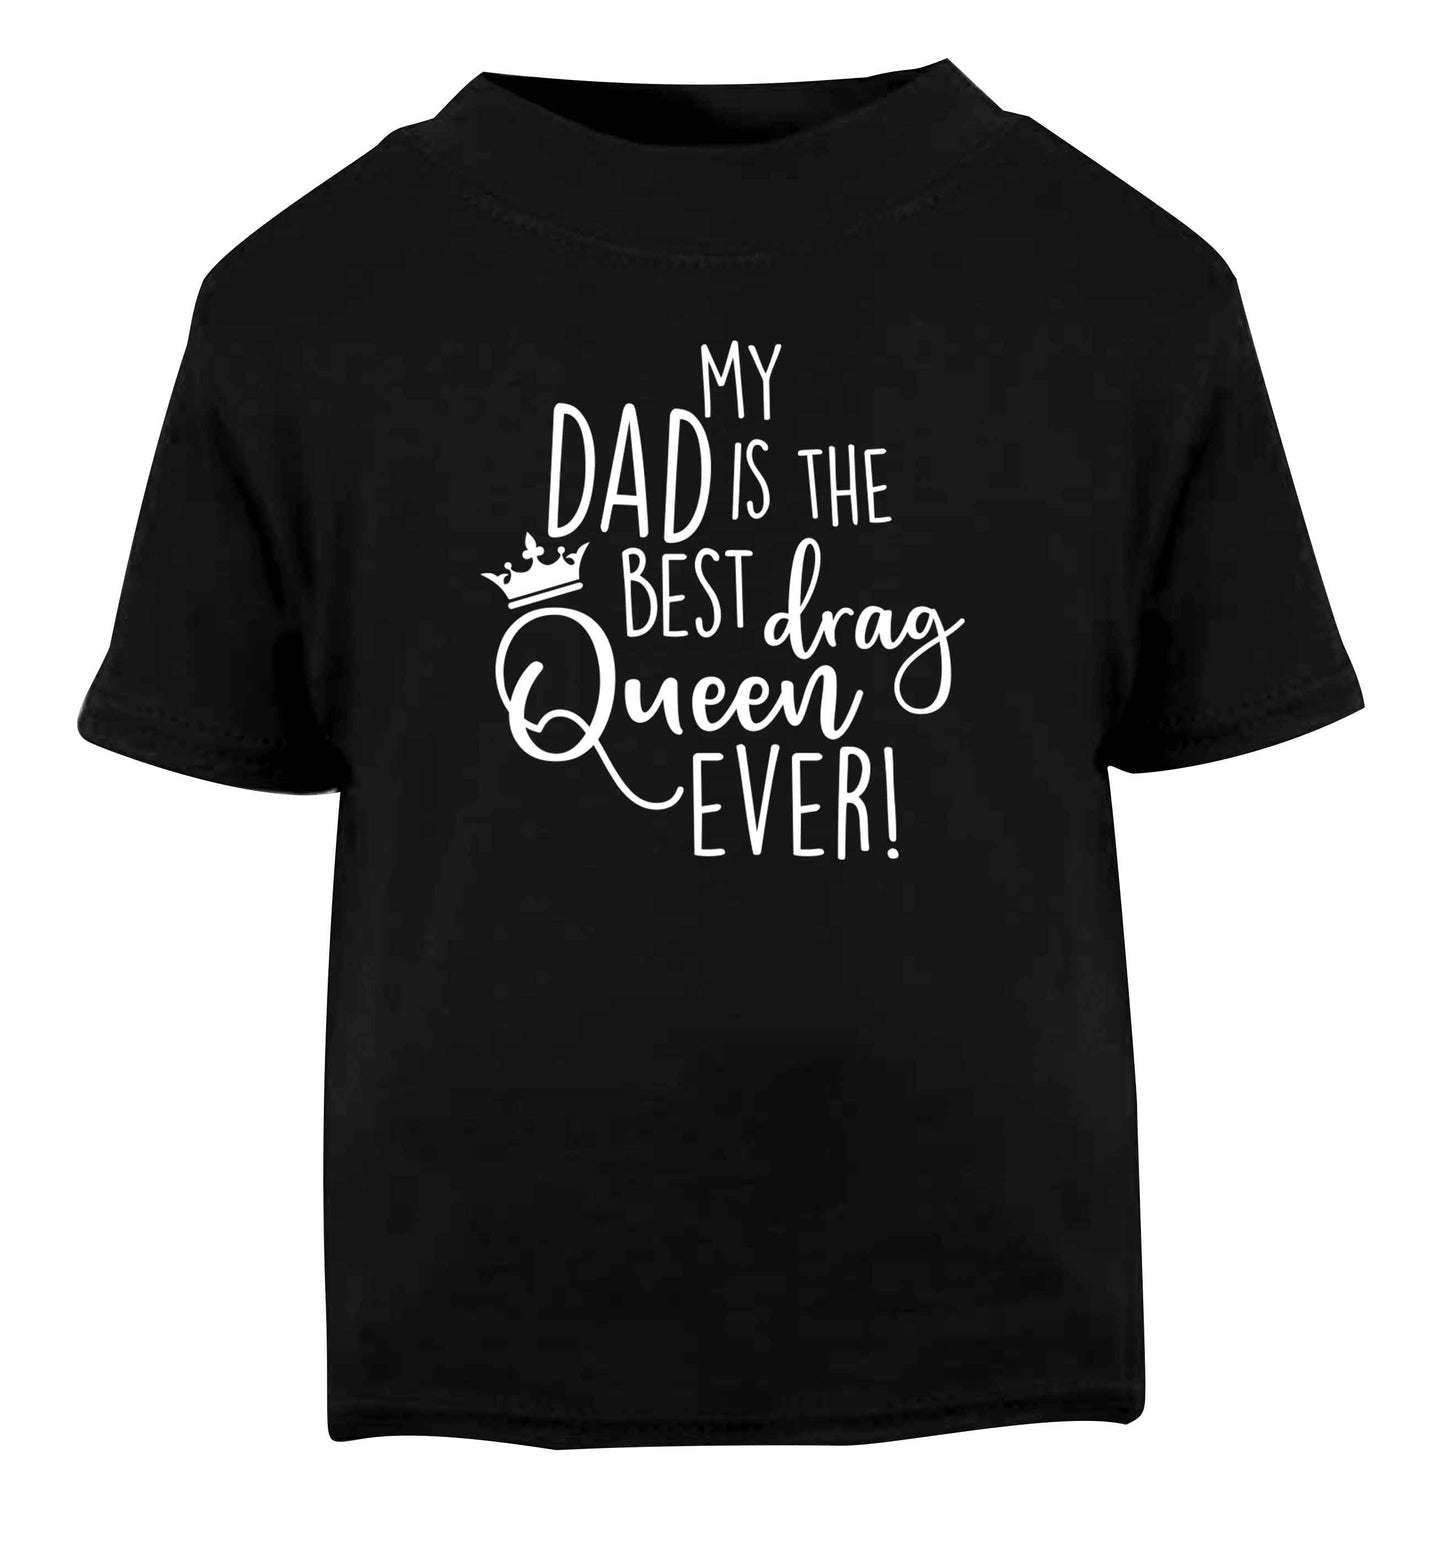 My dad is the best drag Queen ever Black Baby Toddler Tshirt 2 years